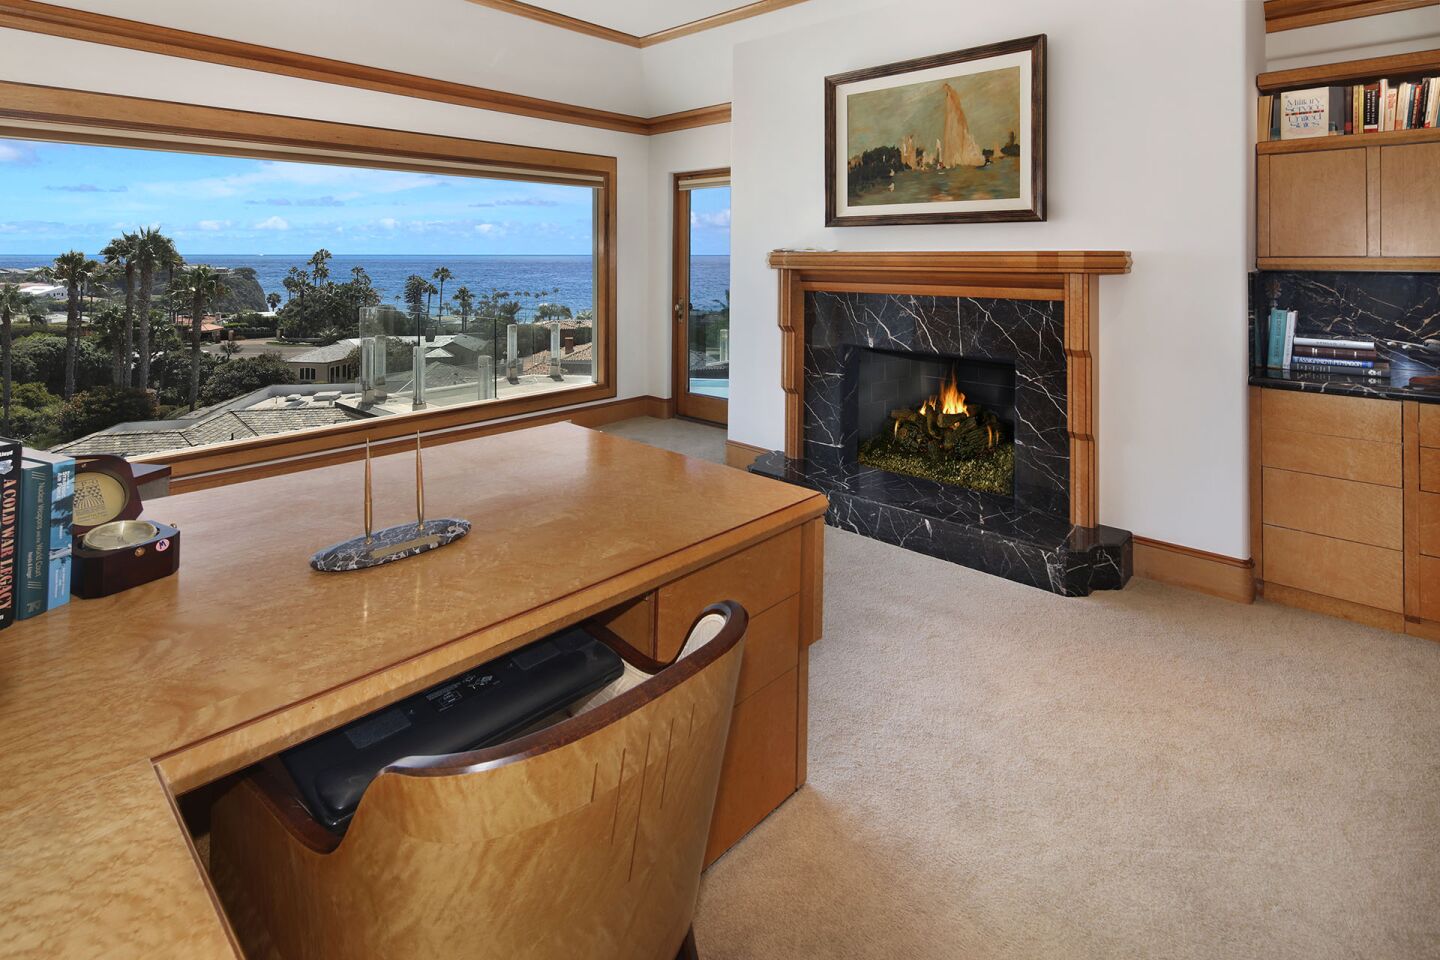 An office with a fireplace is part of the master suite.